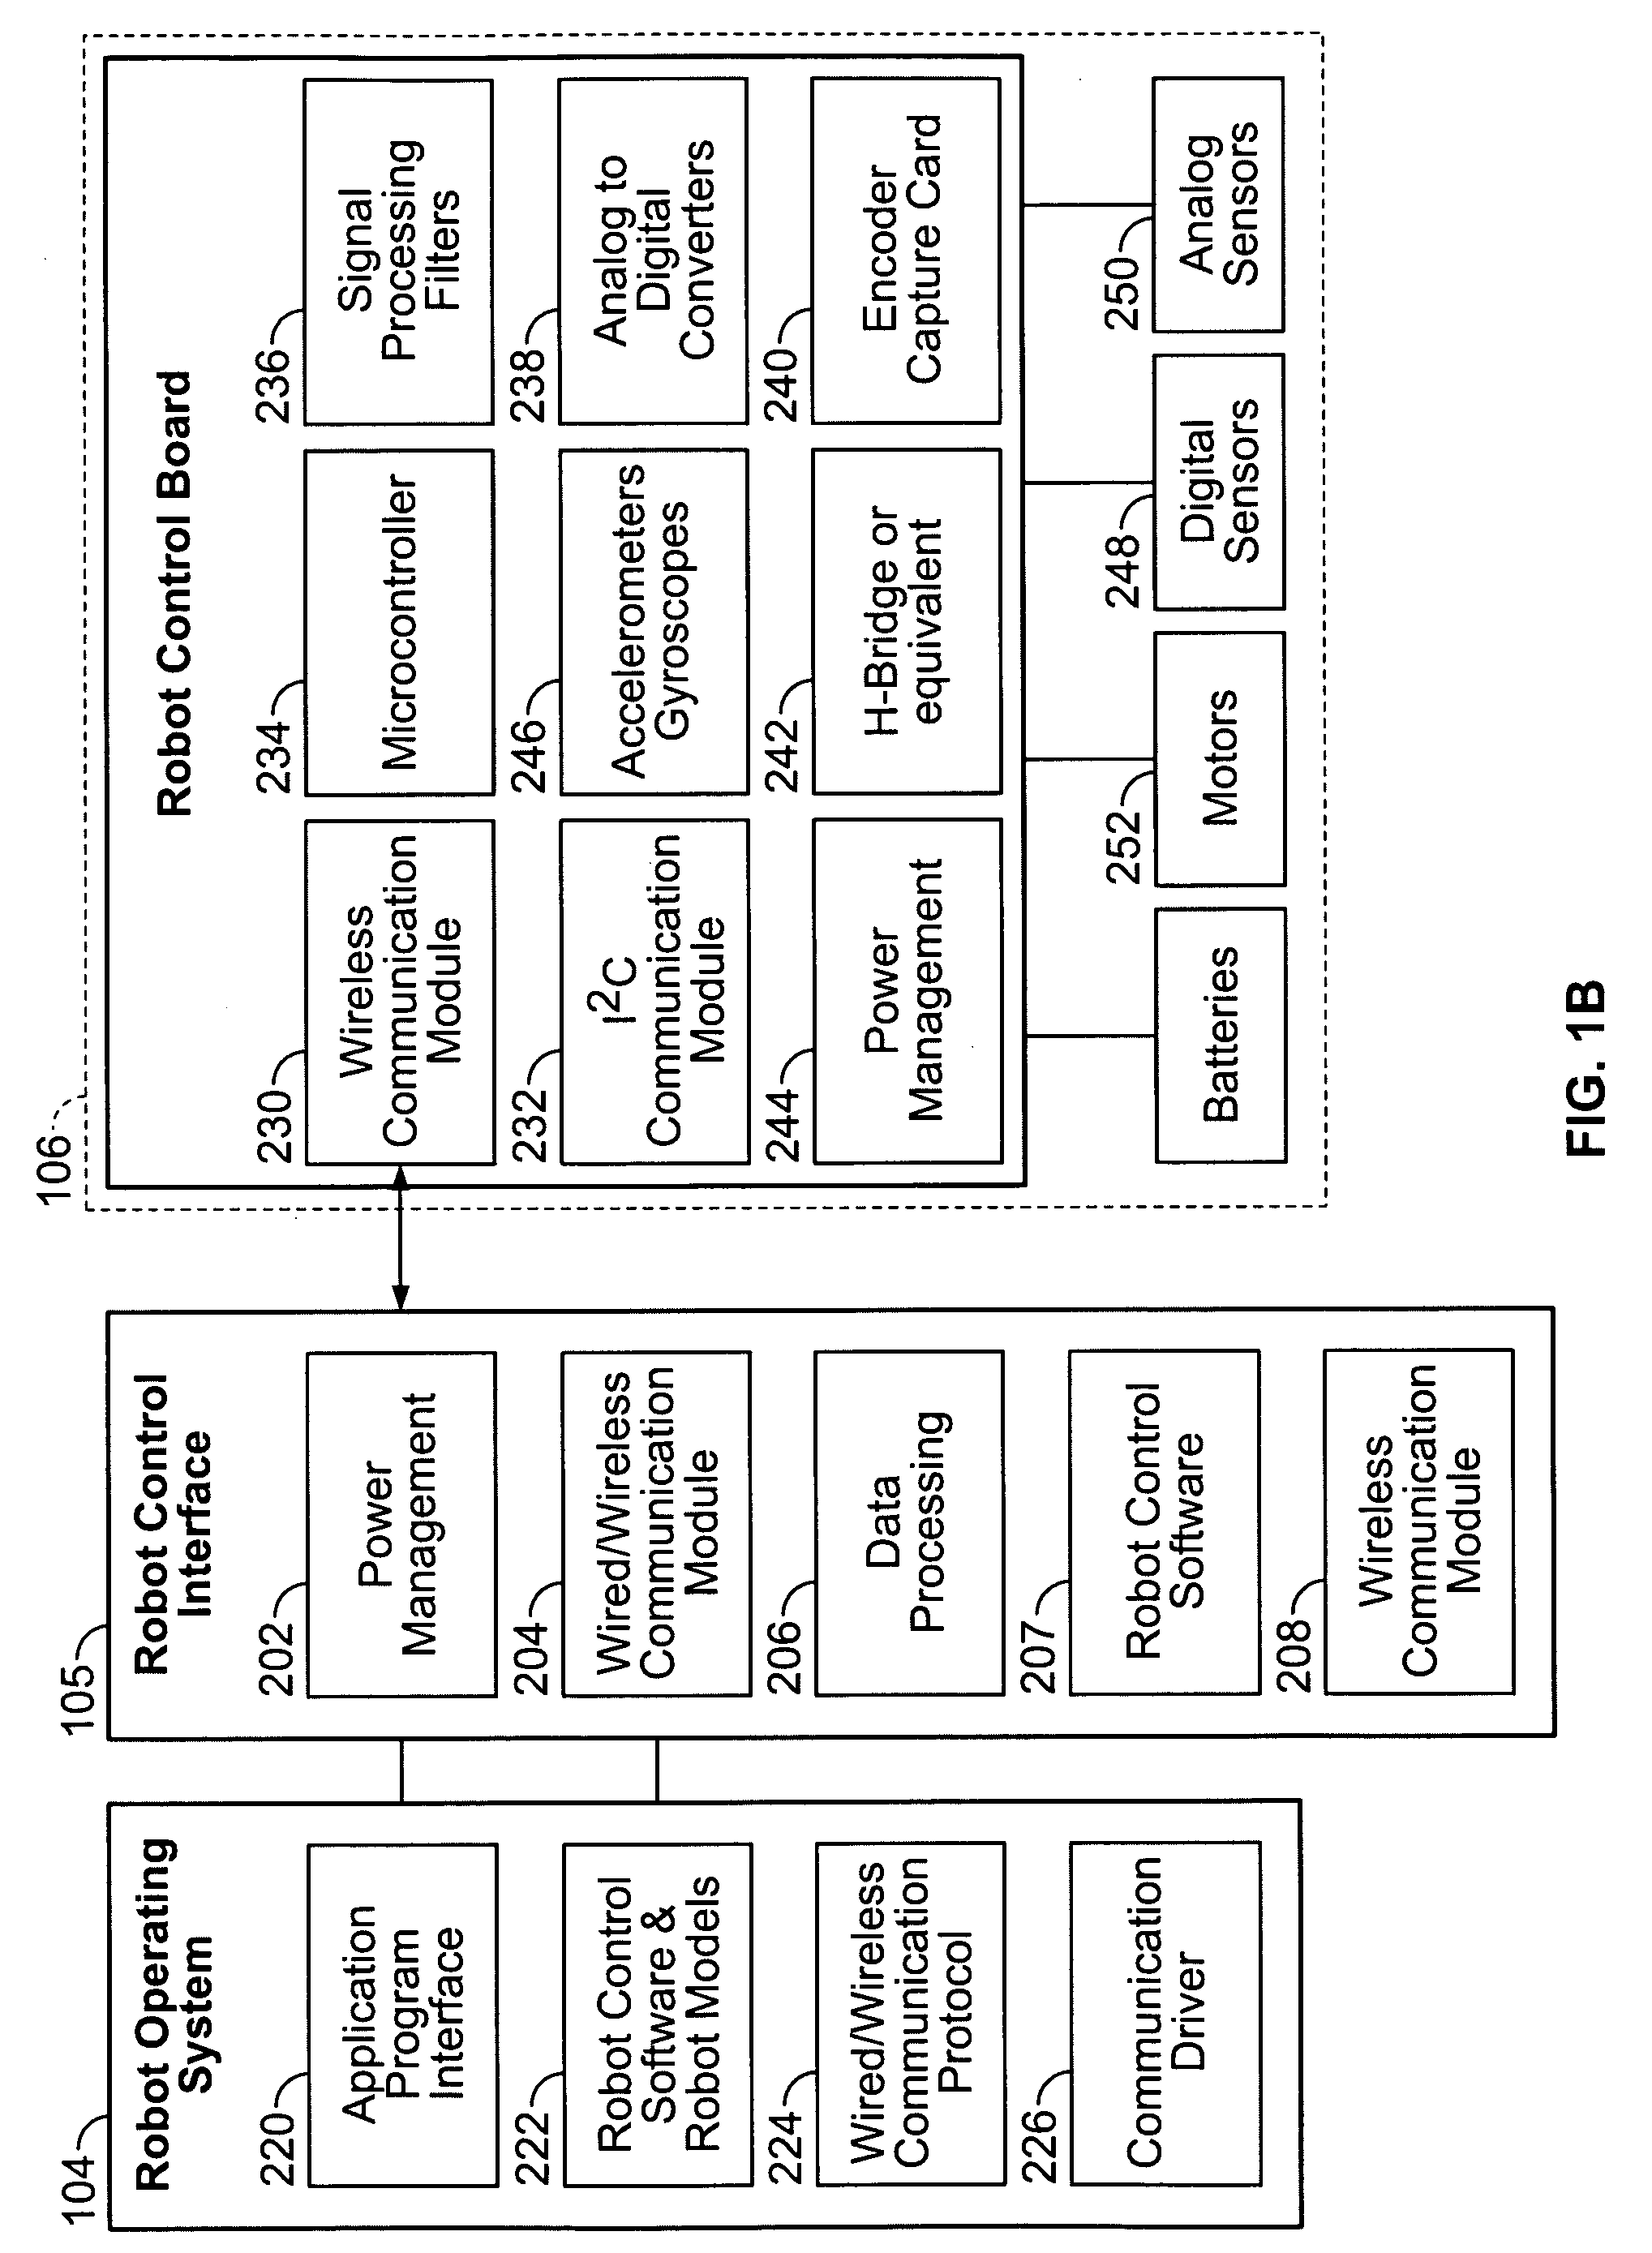 System and method for reconfiguring an autonomous robot